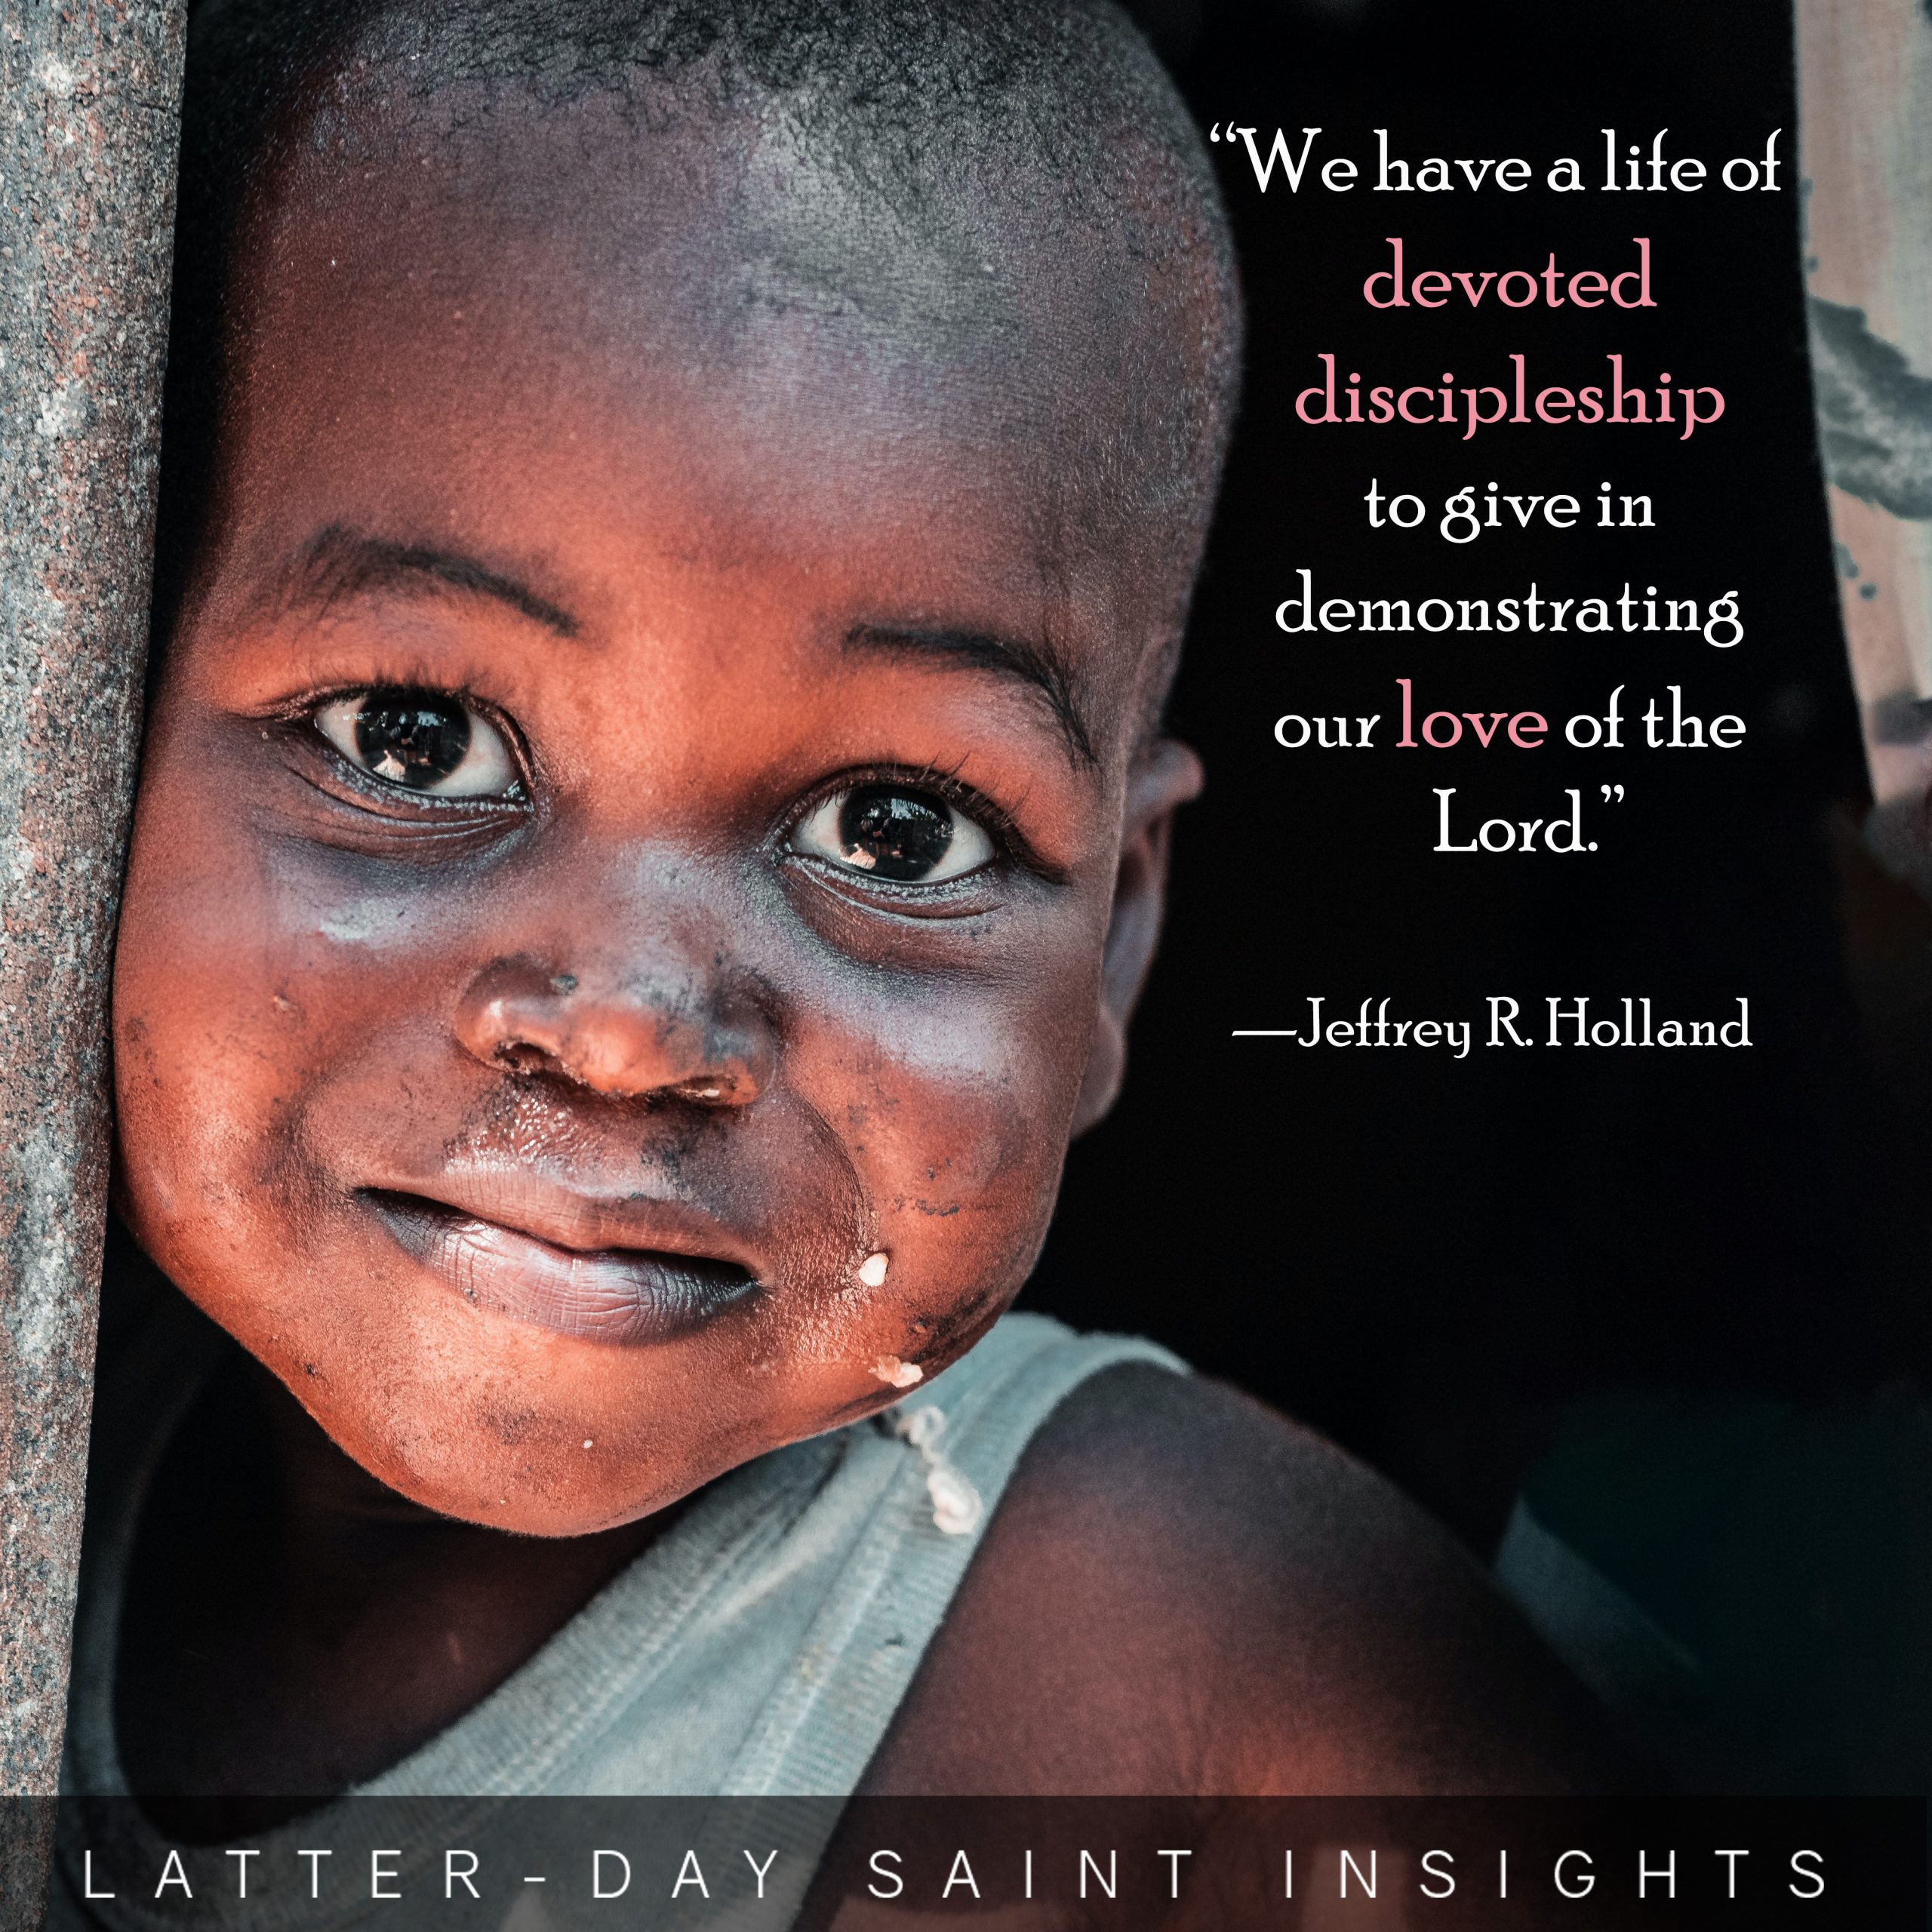 "We have a life of devoted discipleship to give in demonstrating our love of the Lord.” —Jeffrey R. Holland